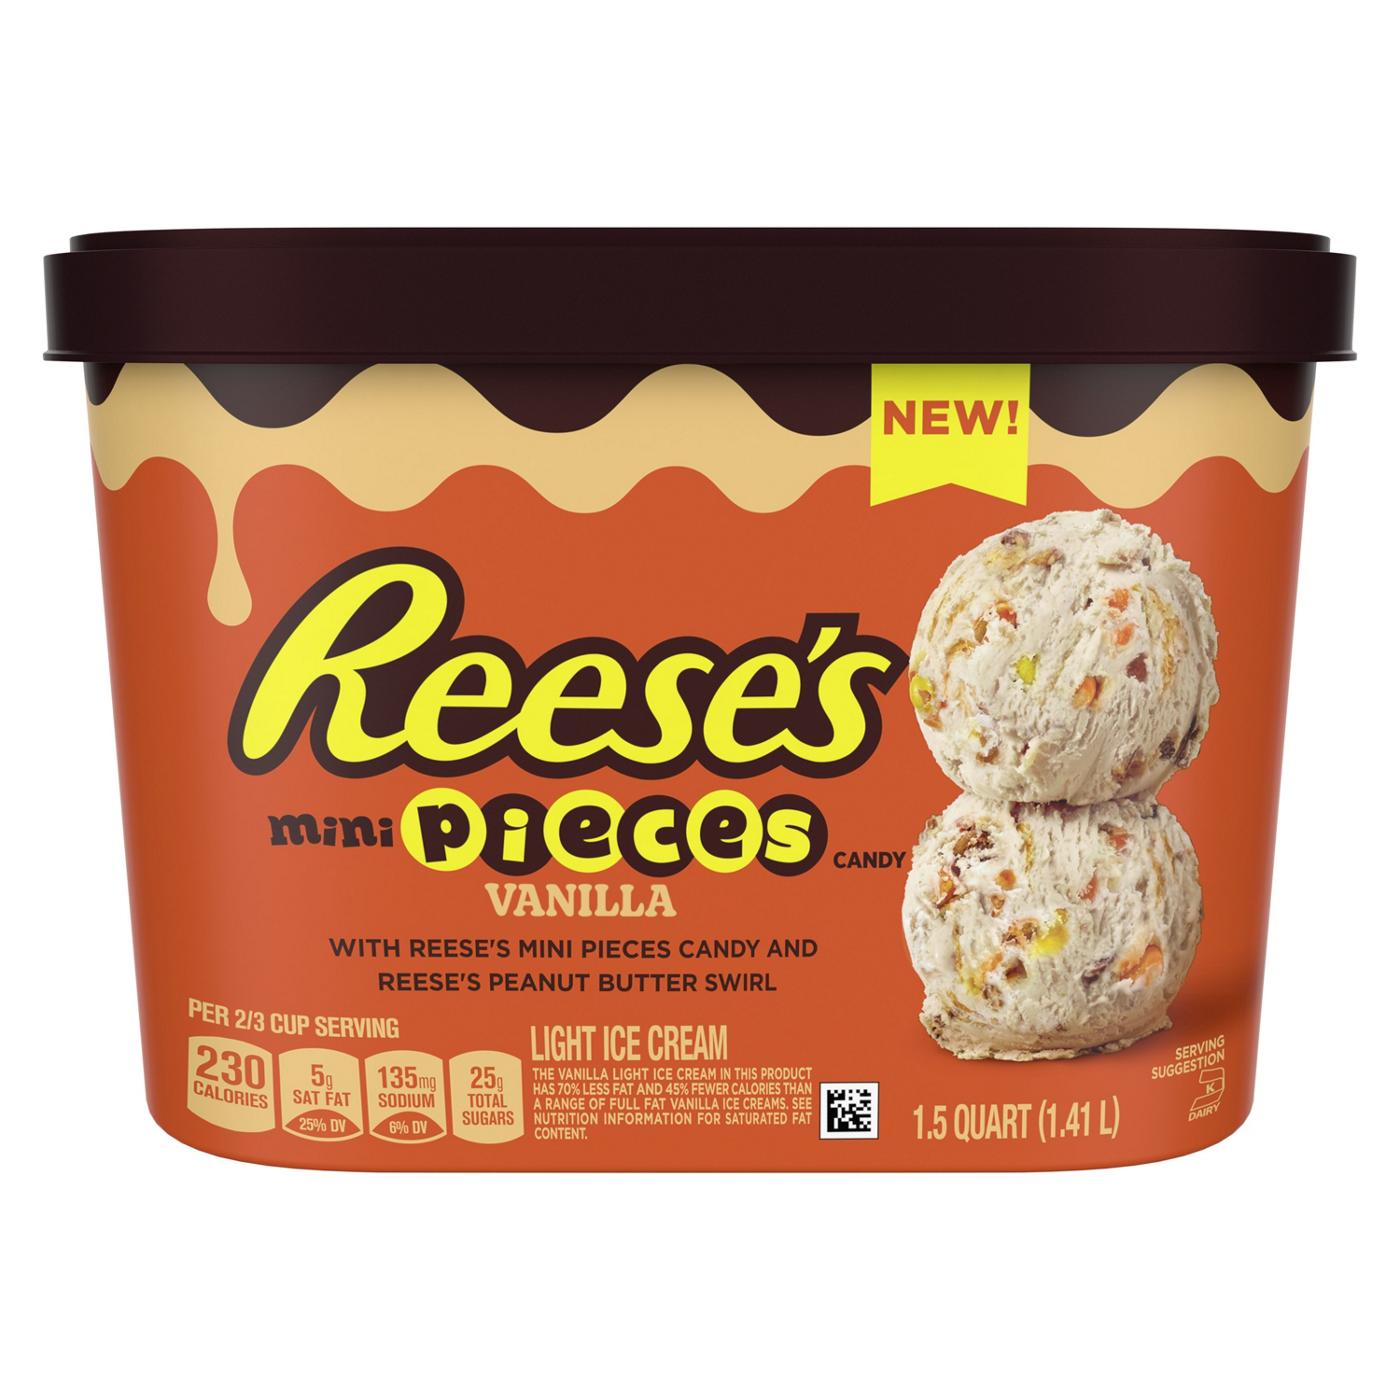 Reese's Vanilla Light Ice Cream with Mini Reese's Pieces and Peanut Butter Swirl; image 1 of 8